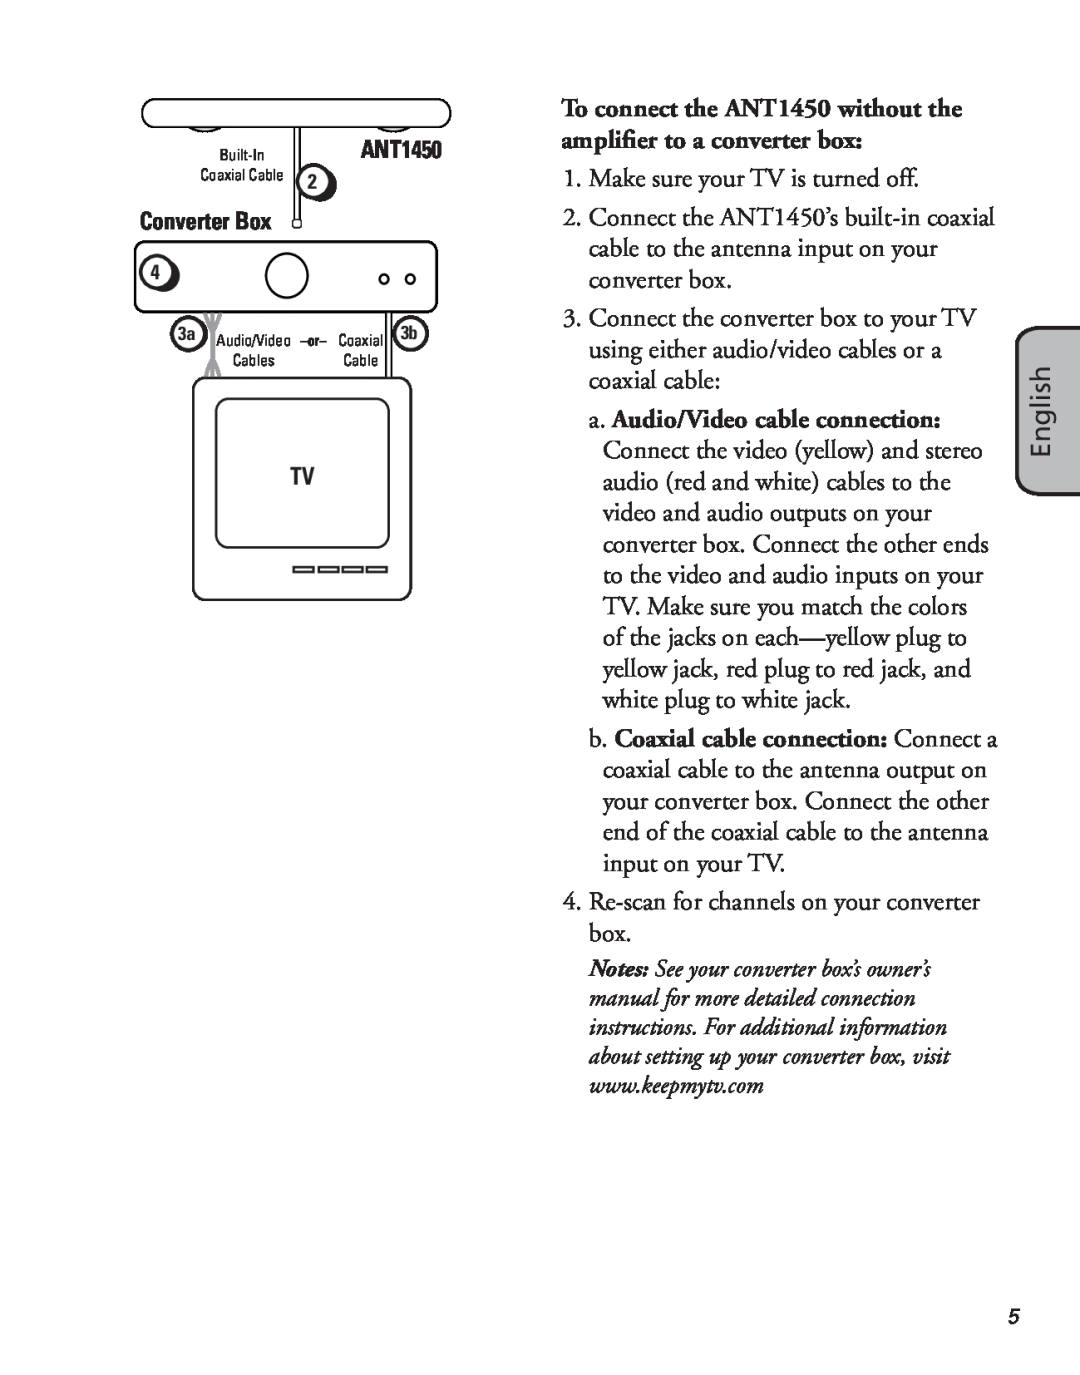 RCA manual To connect the ANT1450 without the amplifier to a converter box, Make sure your TV is turned off, English 